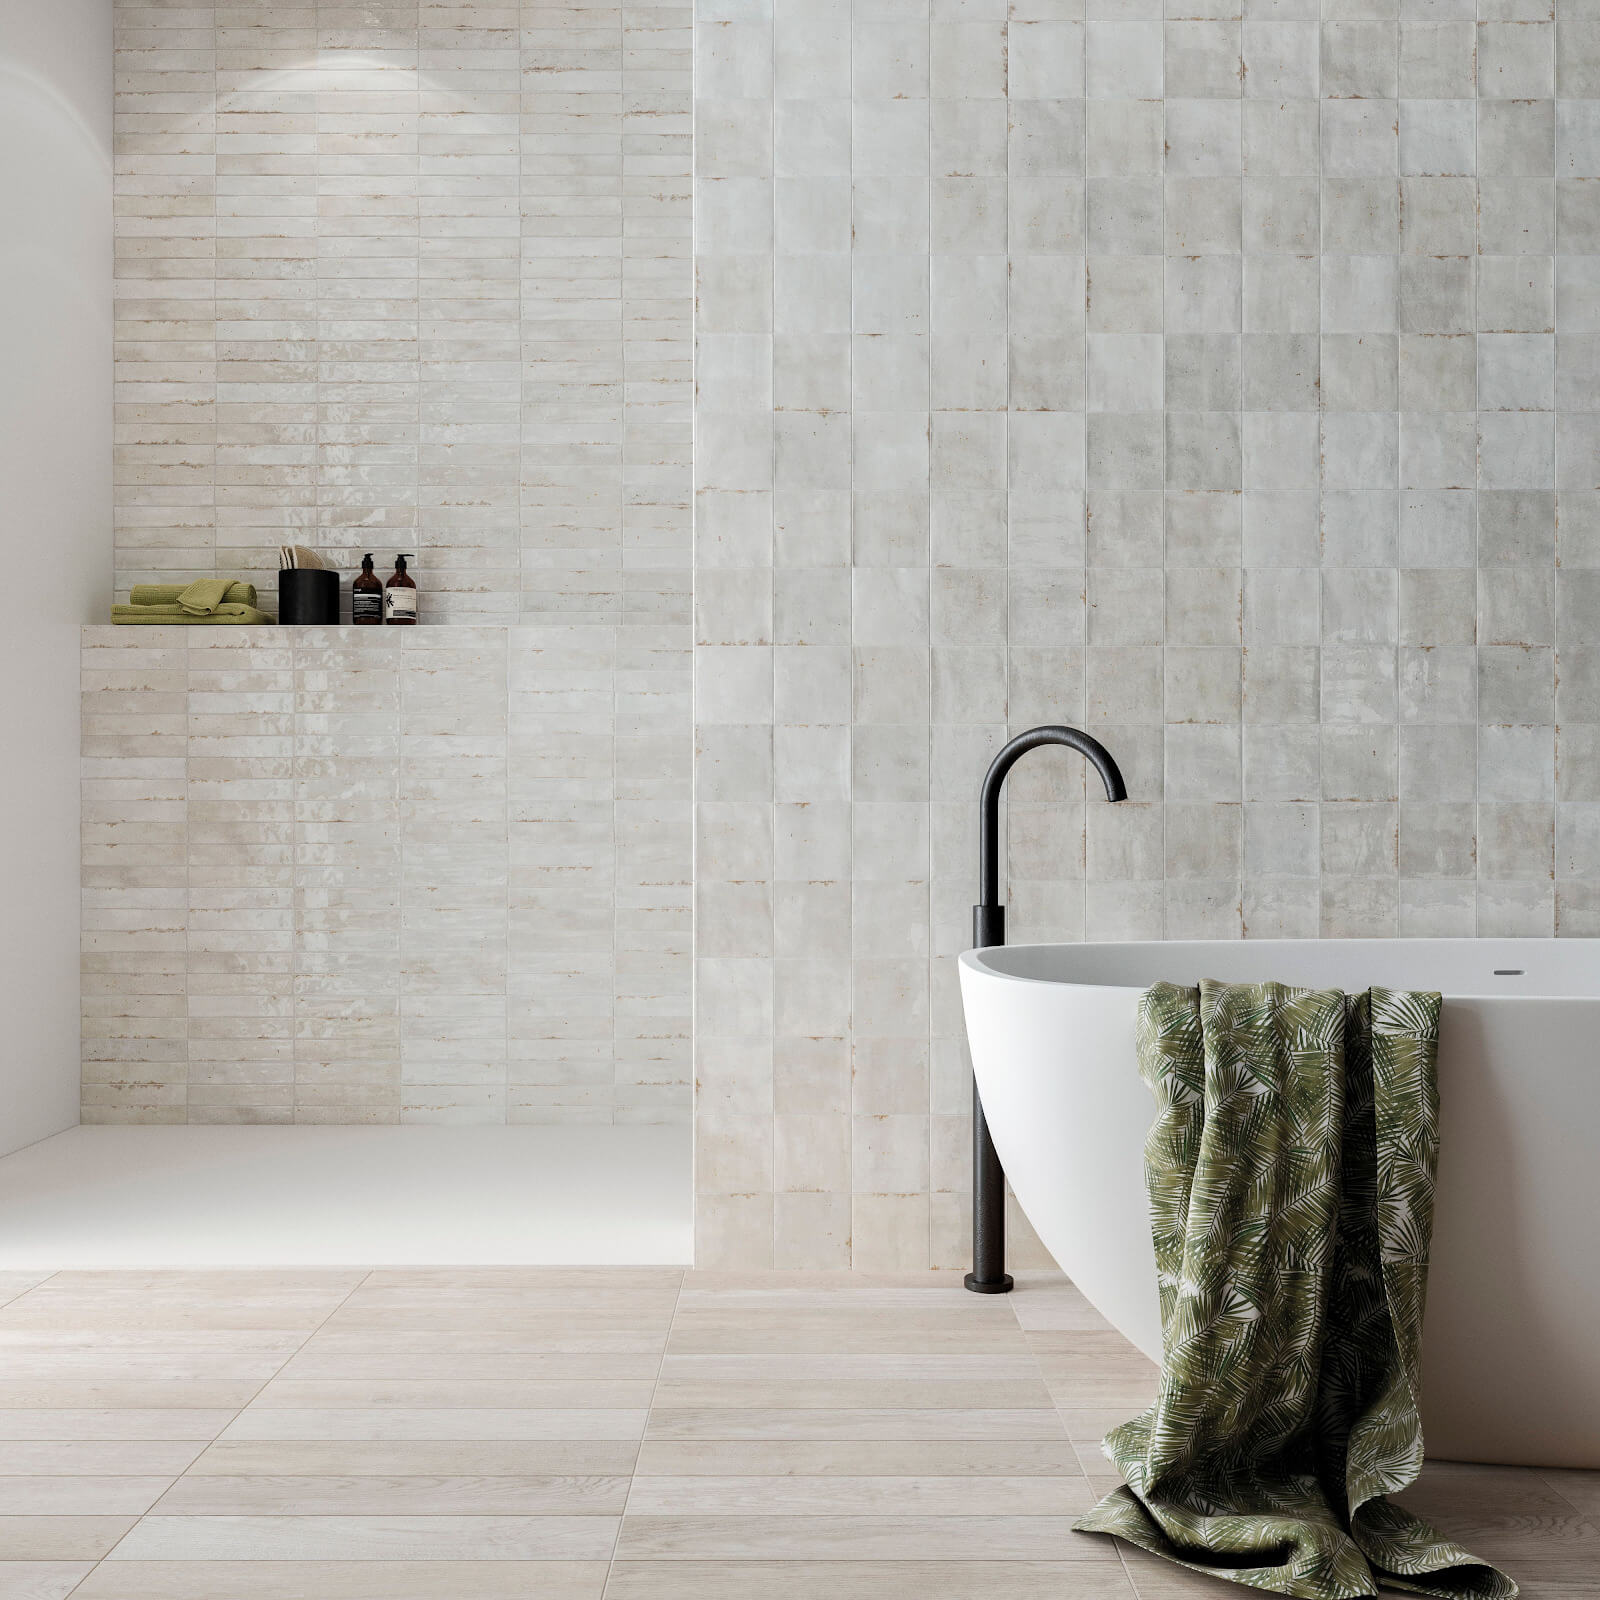 Textured white tile walls in a bathroom and shower